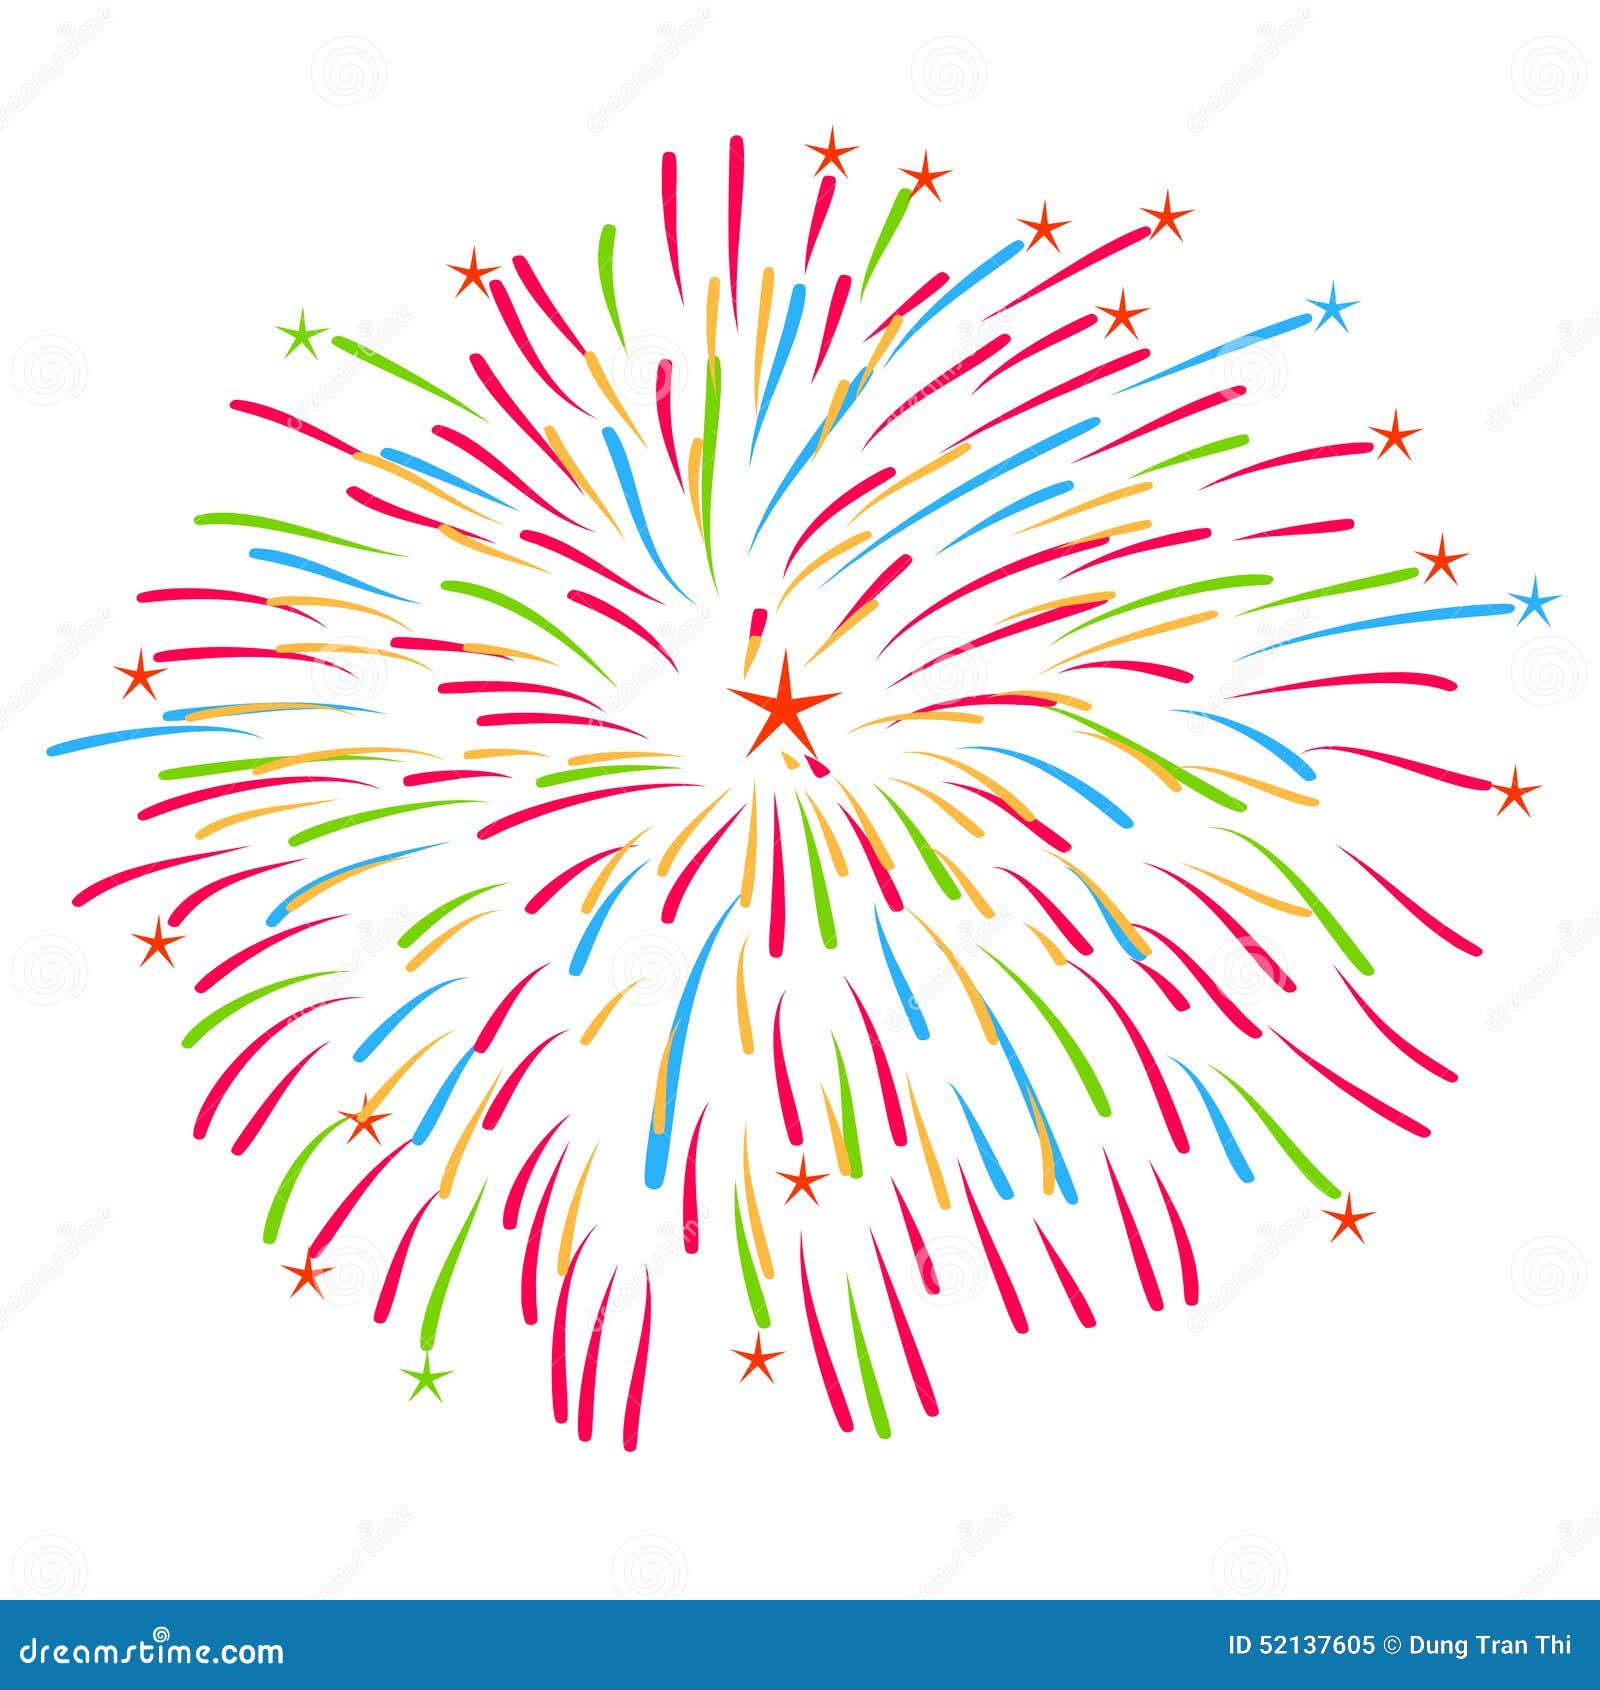 fireworks clipart no background - photo #42